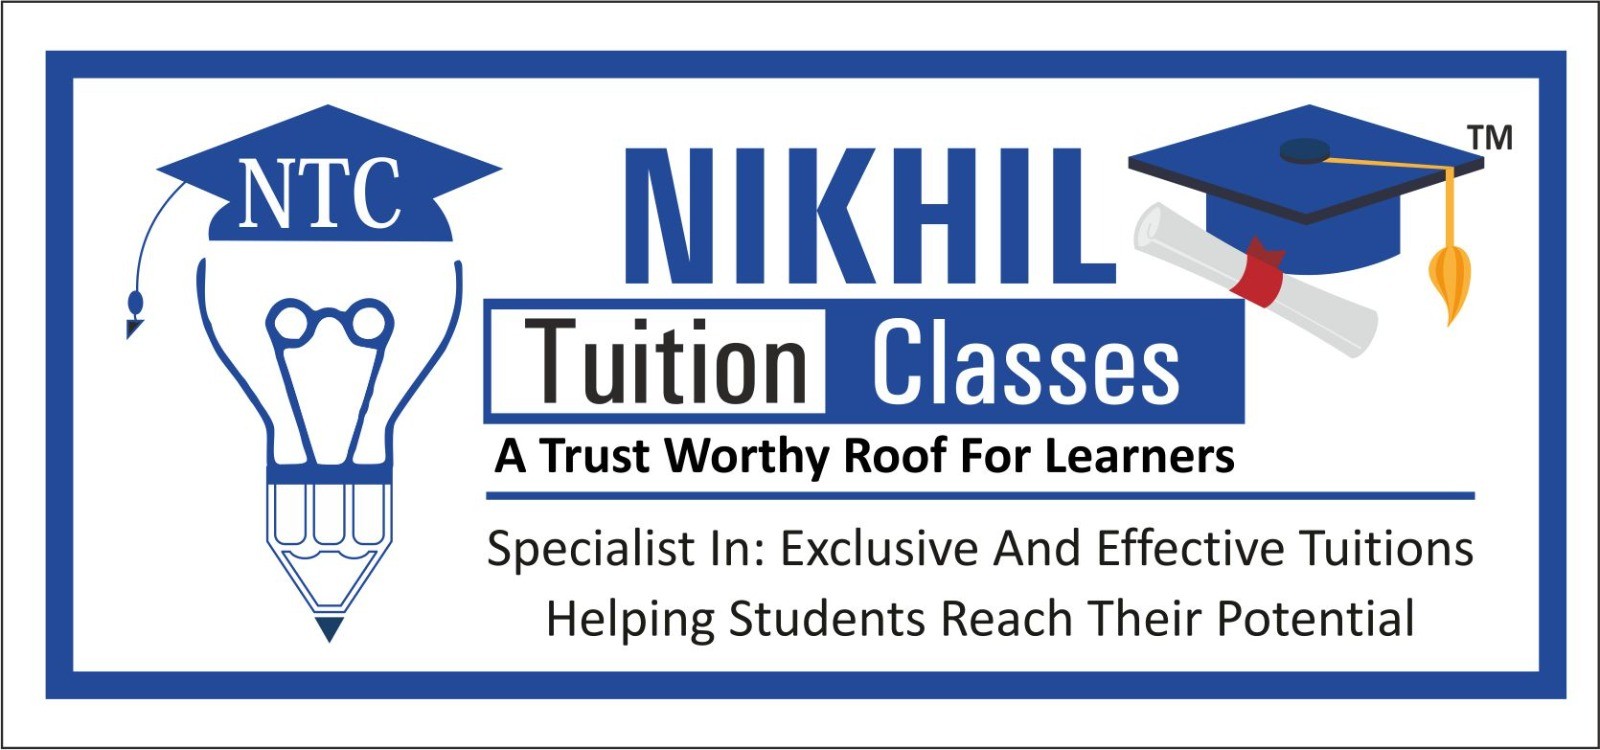 Trust Worthy Roof For the Learners. Helping Students To Reach Their Potential